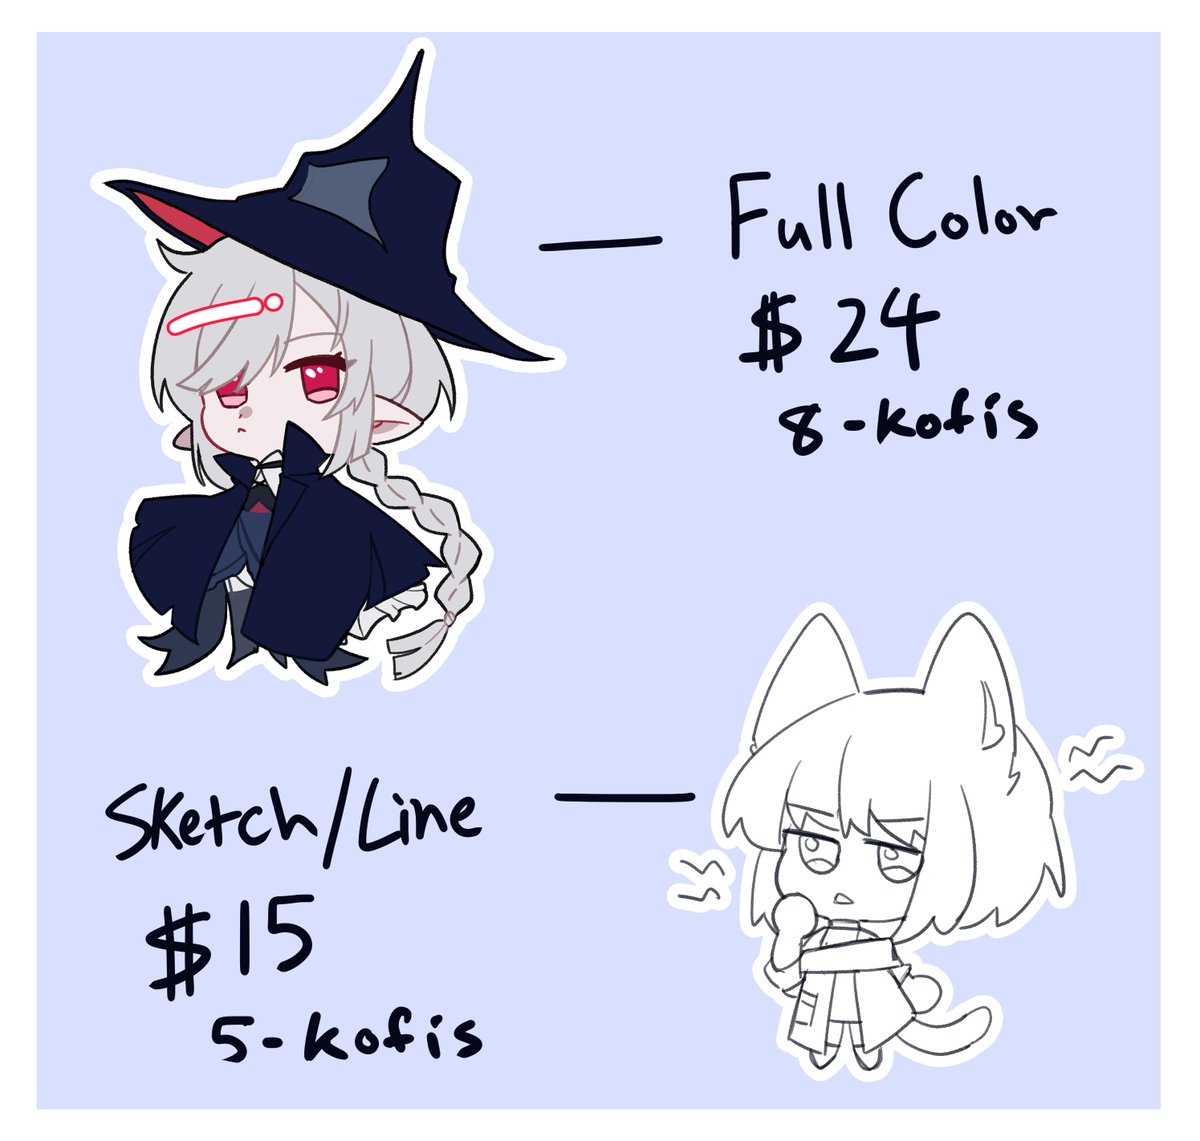 HALLO!!!!! its that time of the year again!!! I'm opening up chibi commissions again!!! Same-ish prices as last time but a new type of commission as well!!! Waow!!! 

Extra Characters +9 USD for all types!!

UNLIMITED SLOTS!!! 

Link and how to send refs down below!! vvv 